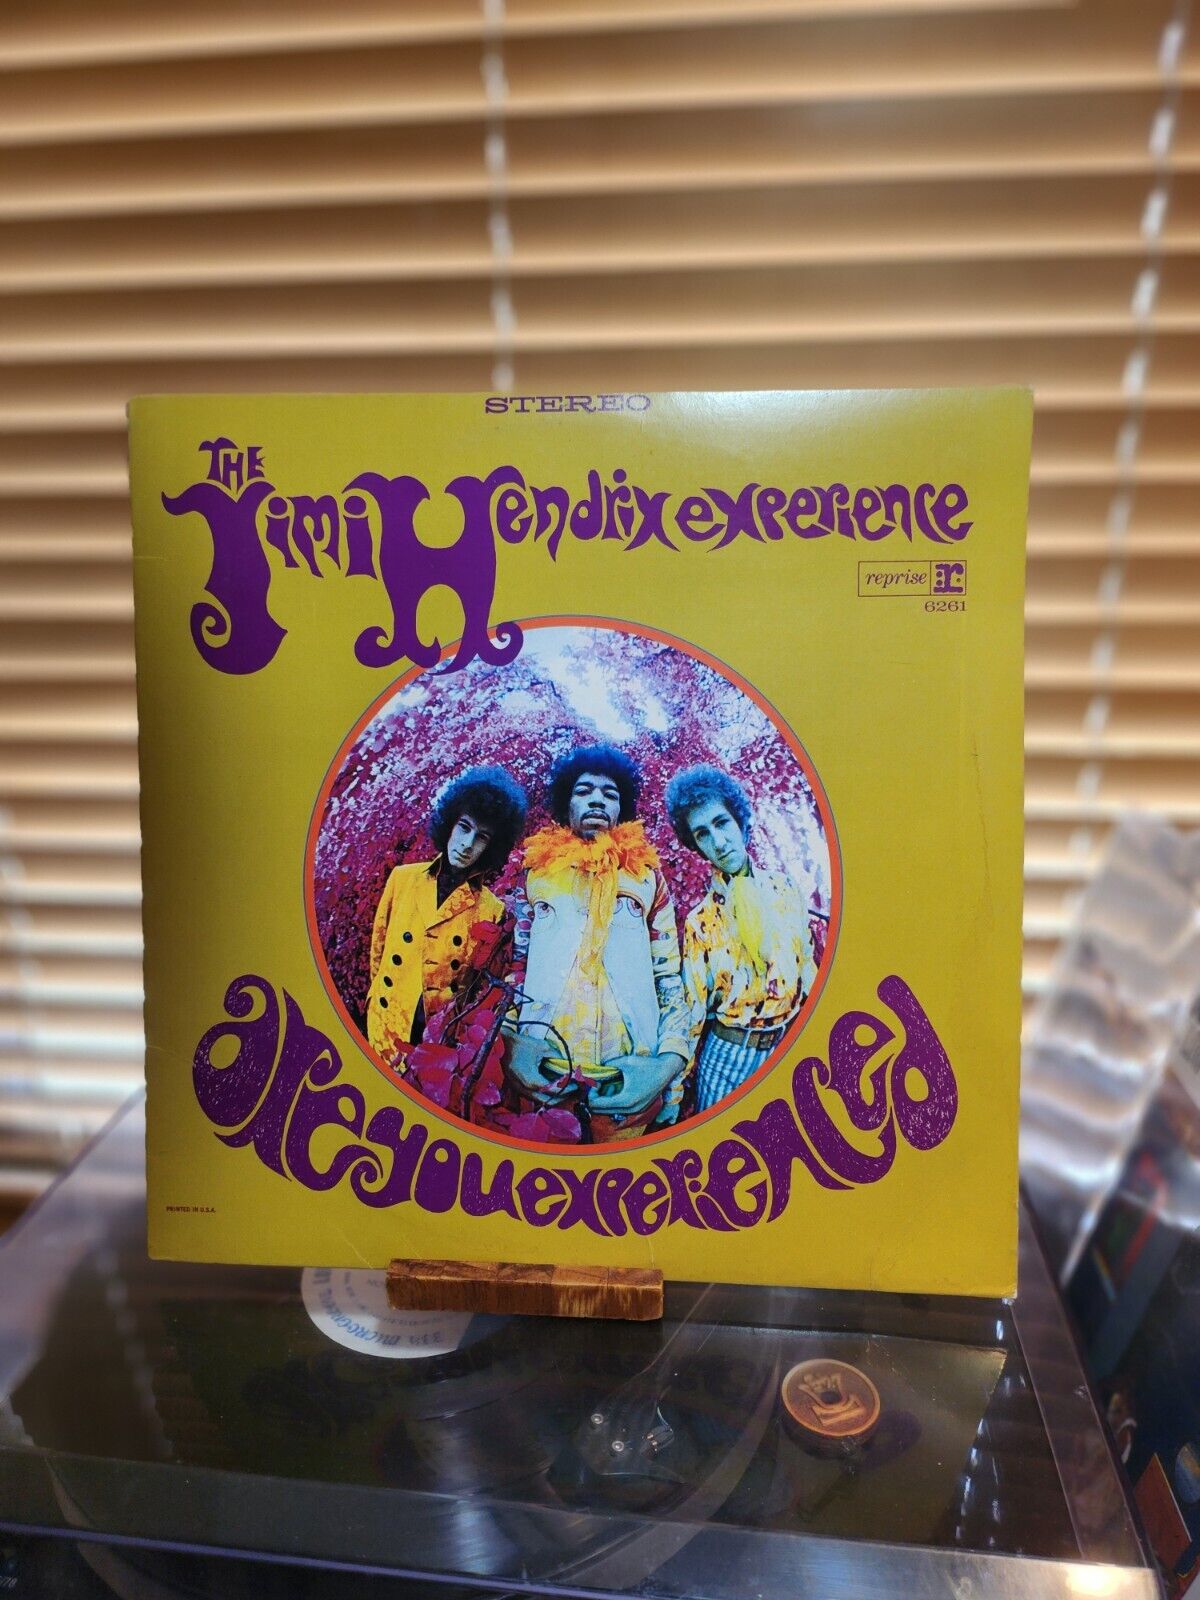 Jimi Hendrix Experience, Are You Experienced, 1974 Reprise Stereo Press, Vg+/Vg+